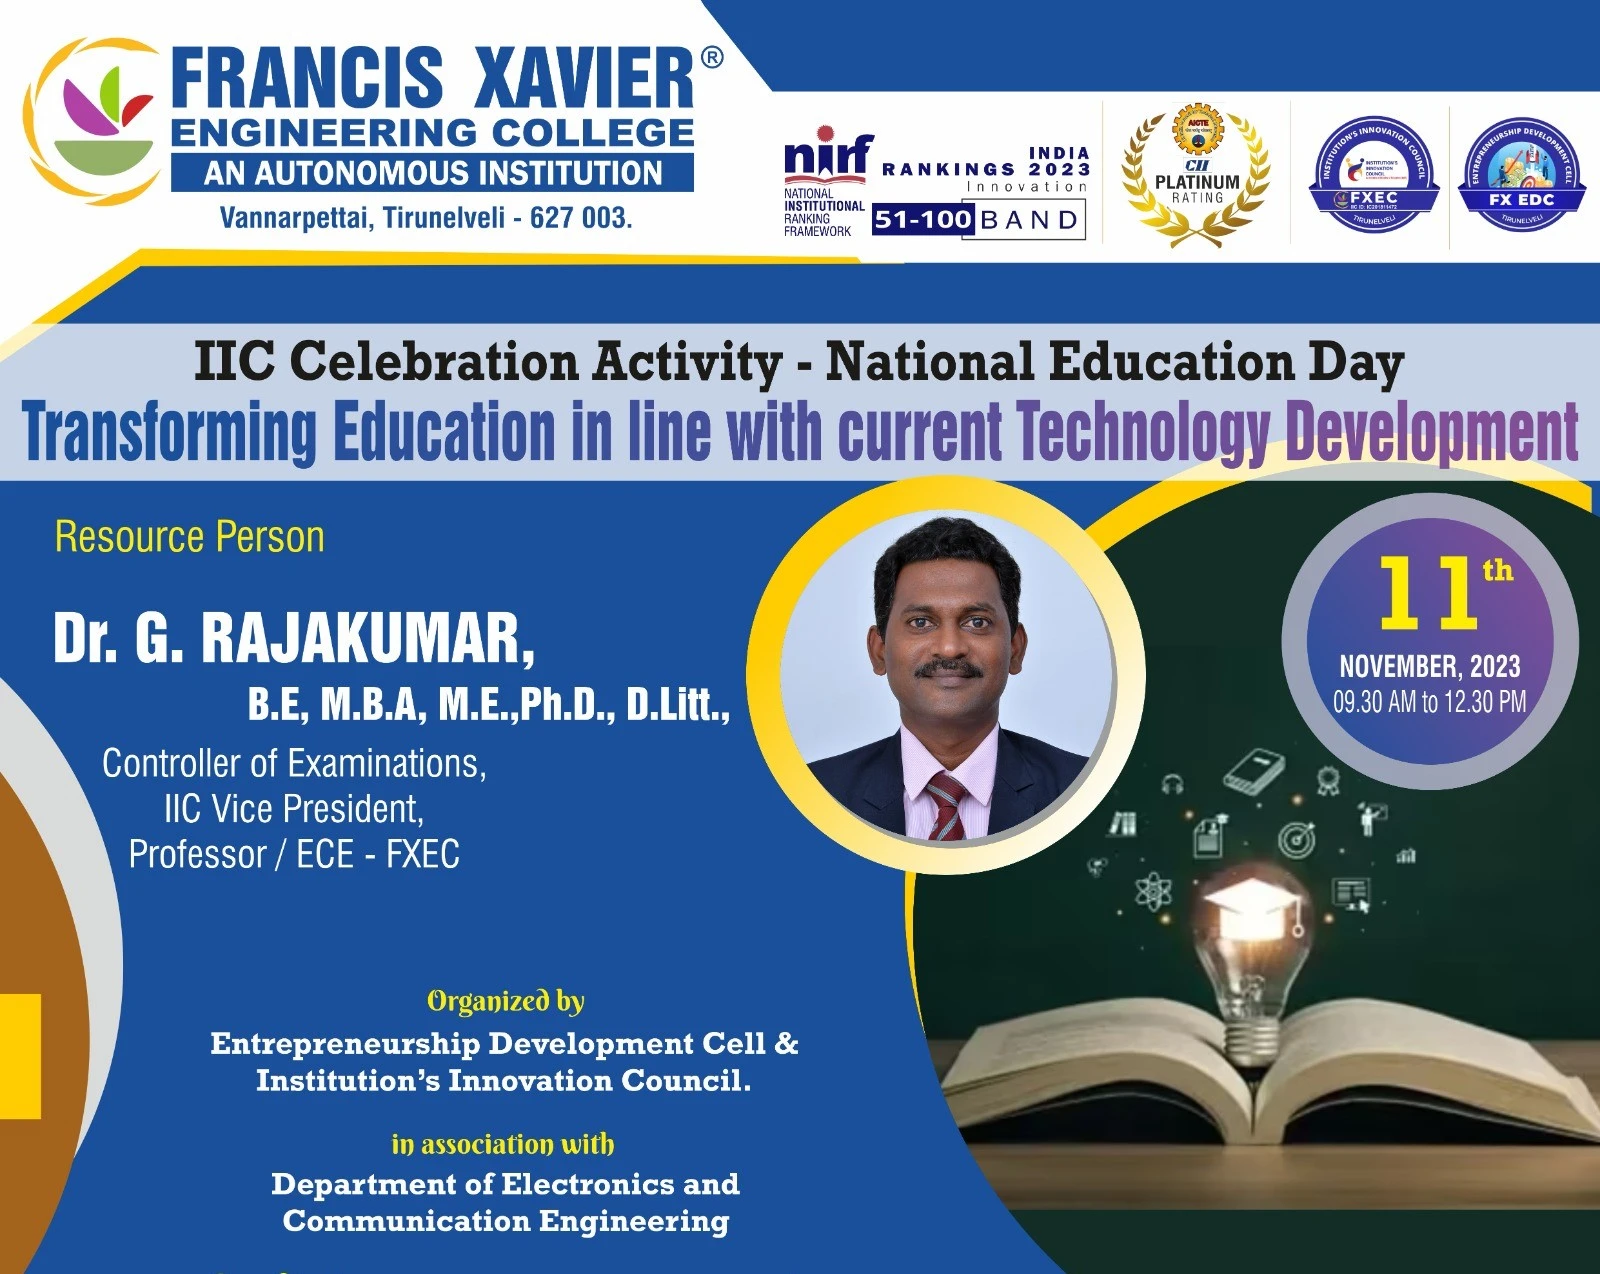 Transforming Education in line with current Technology Development